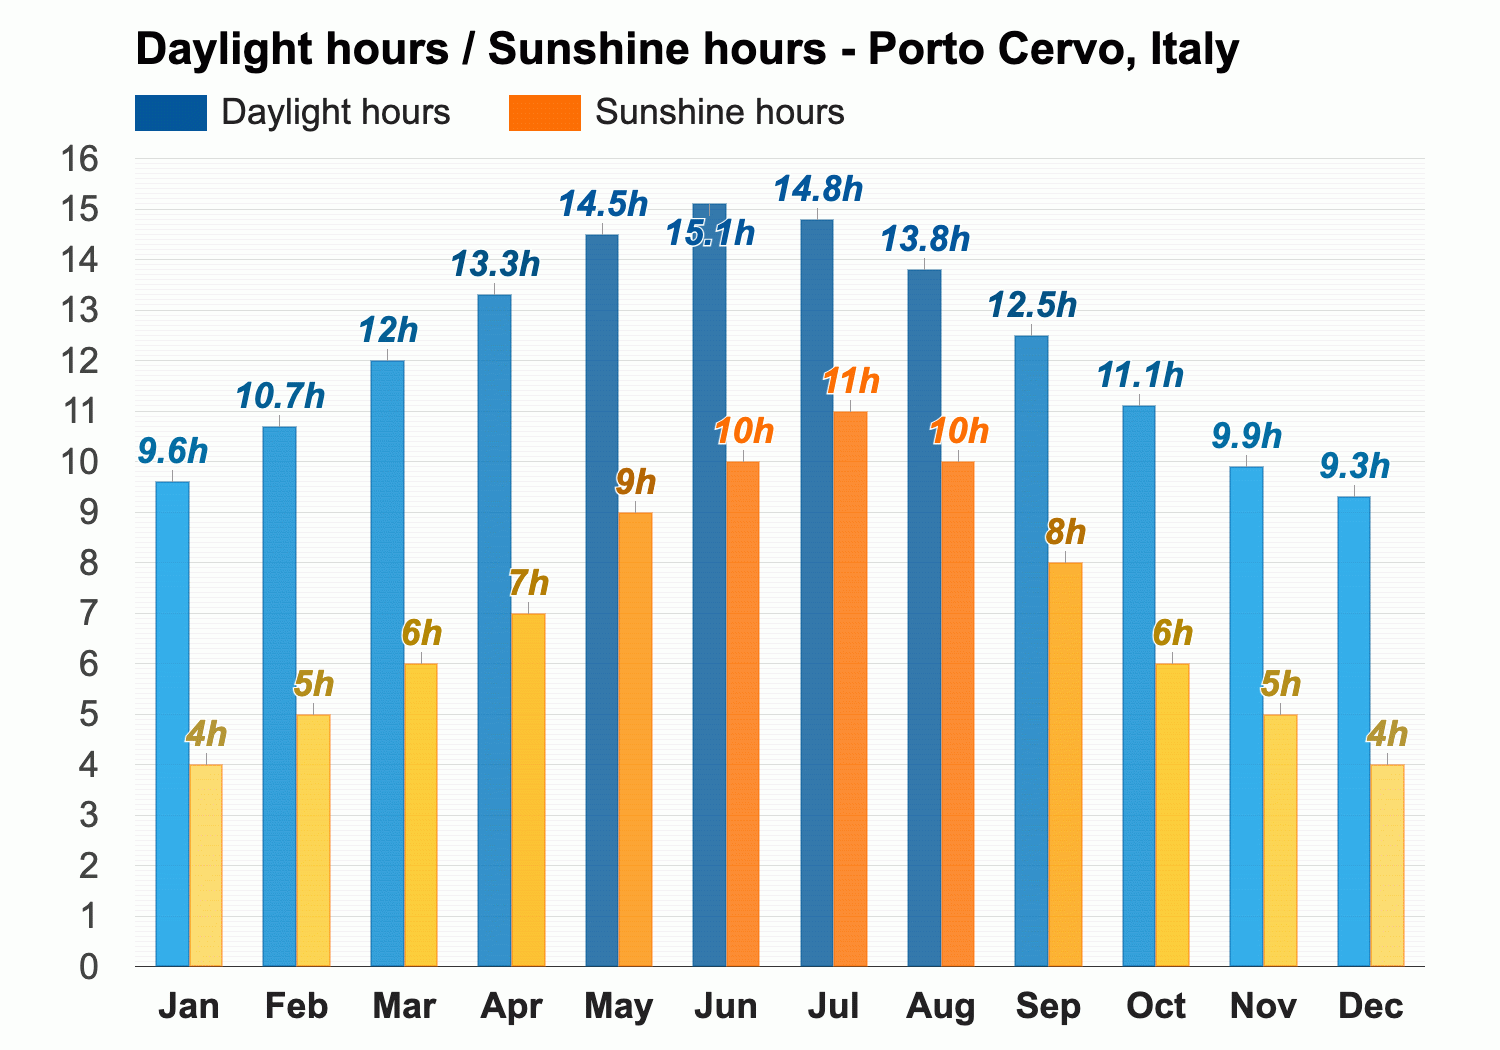 Porto Cervo, Italy - August weather forecast and climate information |  Weather Atlas